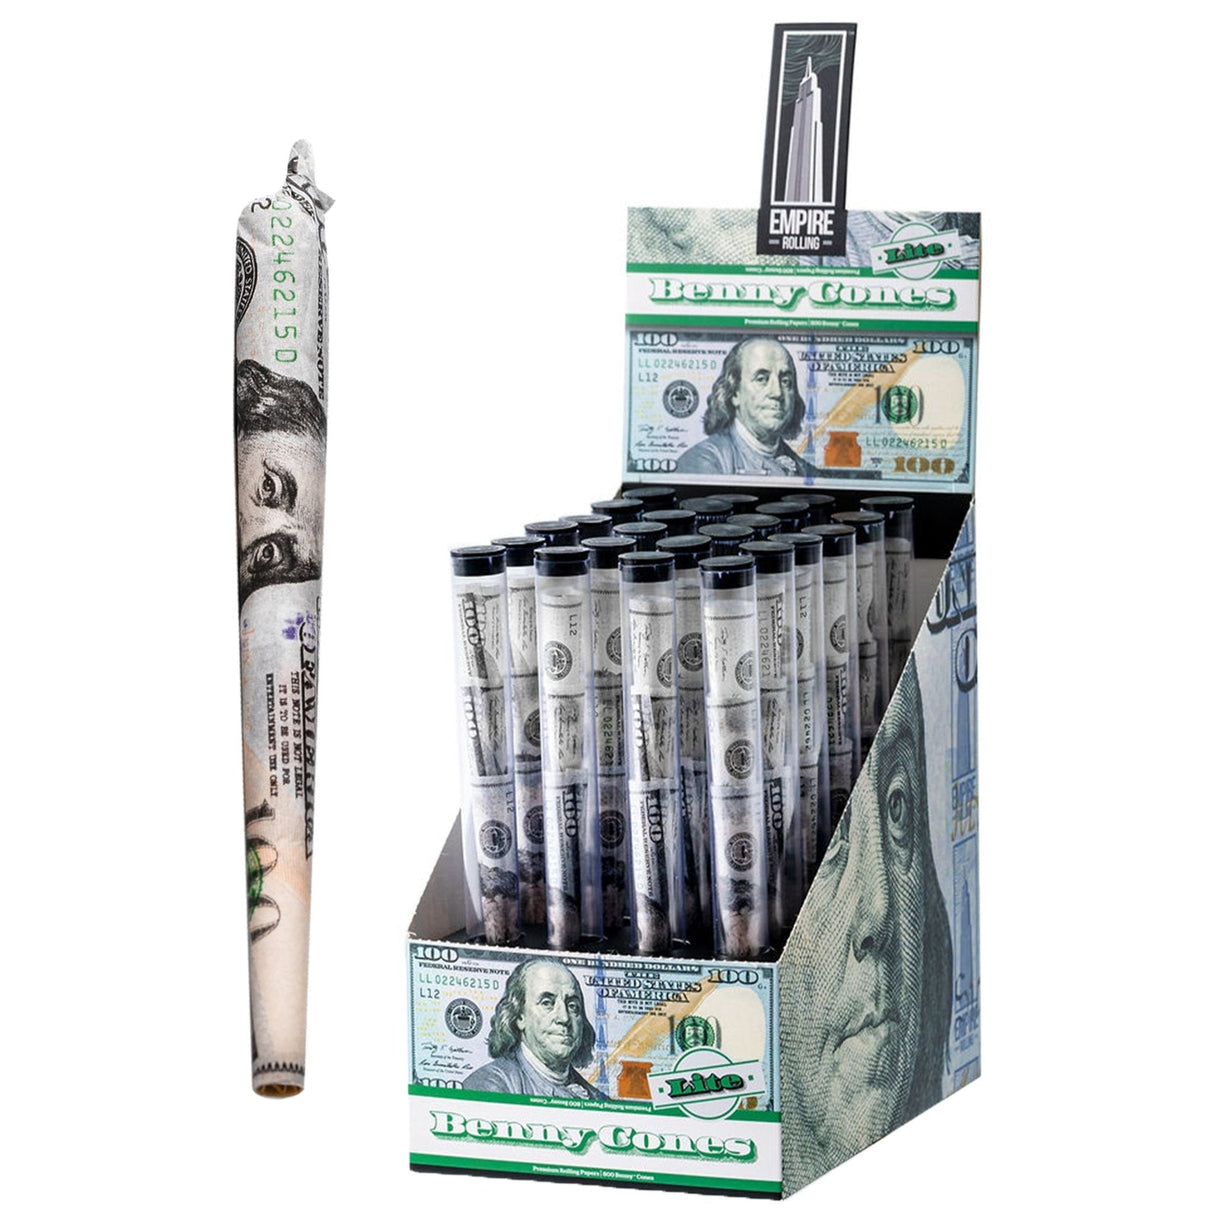 BENNY LITE Cones by Empire Rolling Papers, displayed in money-themed packaging